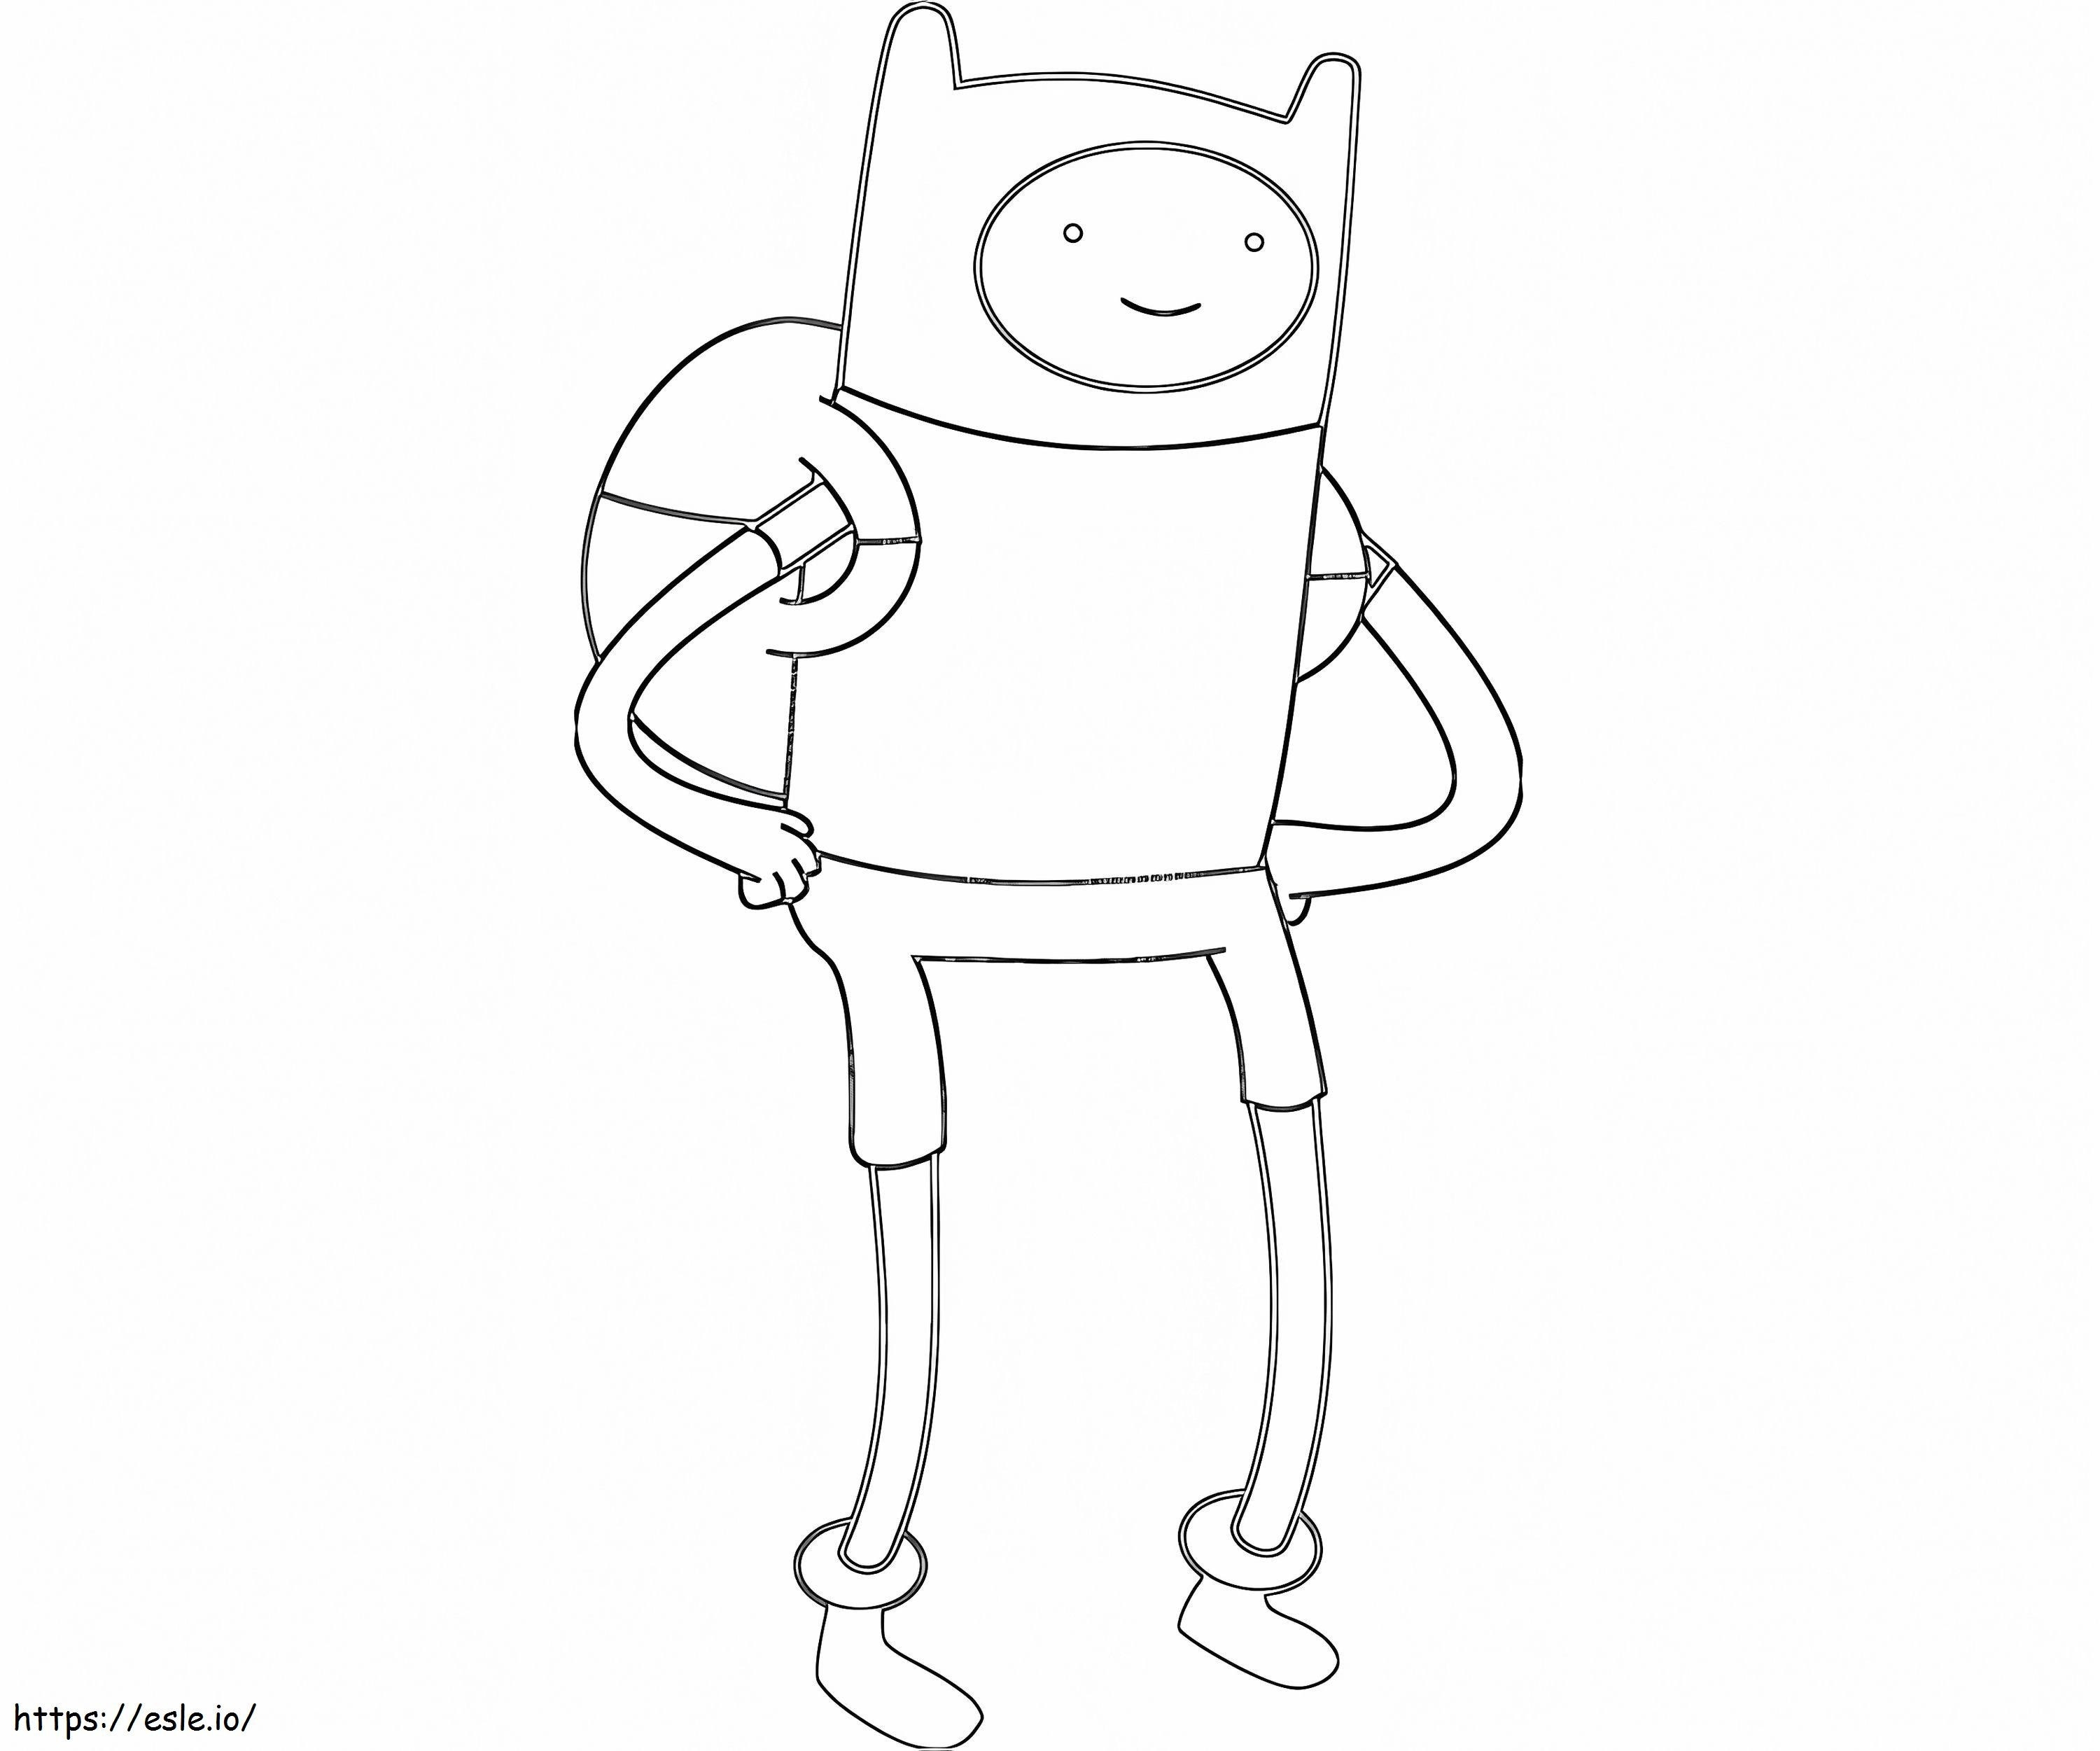 Finn Standing coloring page